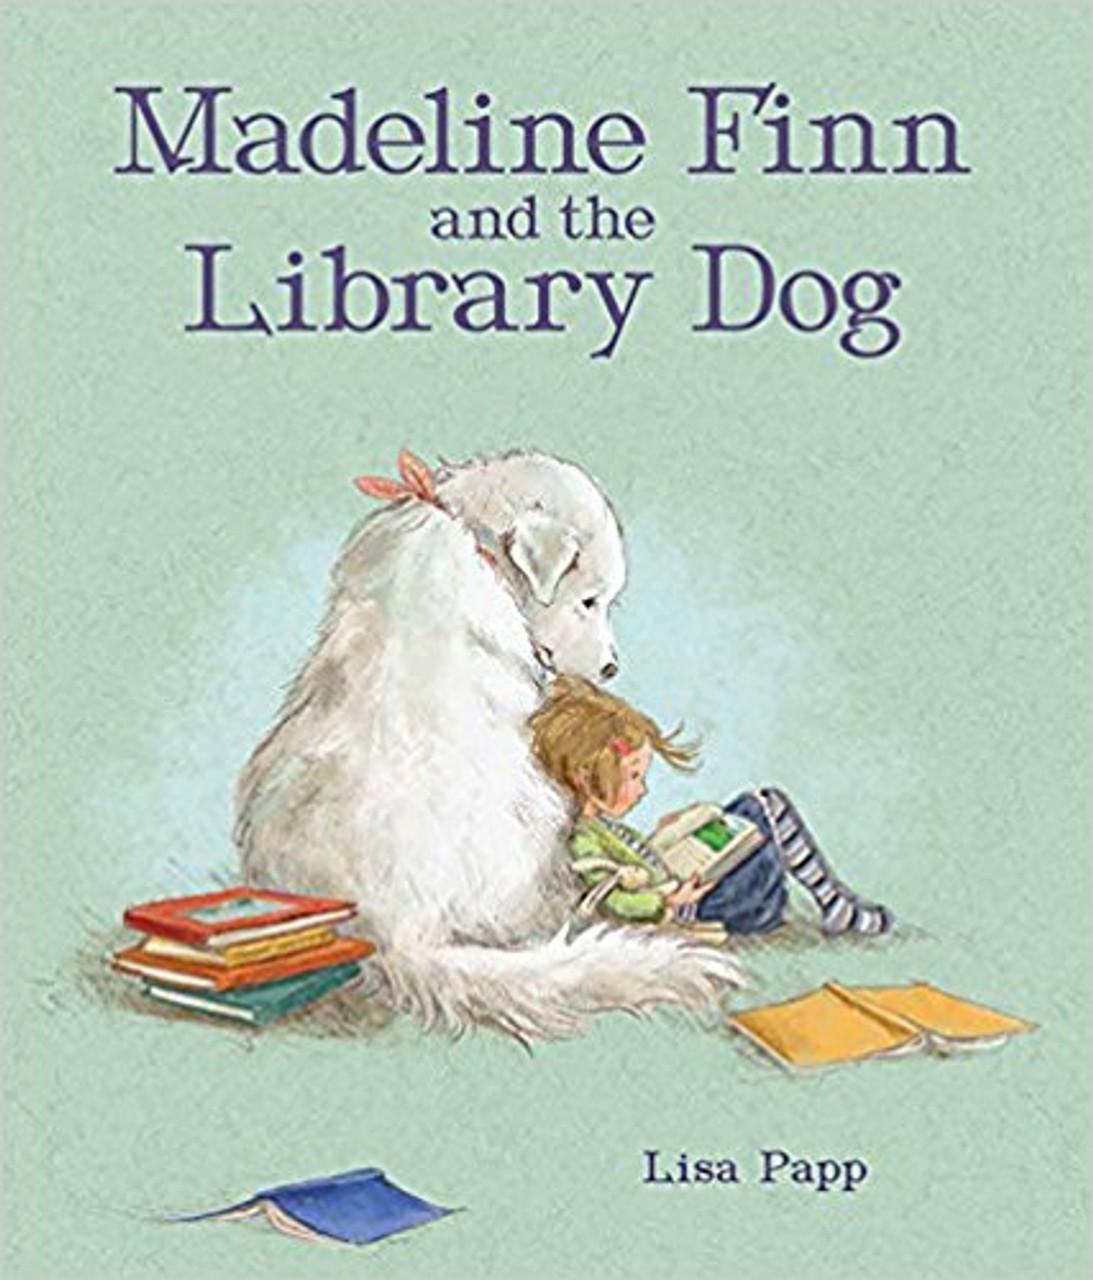 Reluctant reader Madeline really wants to earn a star at school, so when Mrs. Dimple, the librarian, suggests she read to a dog Madeline gives it a try.